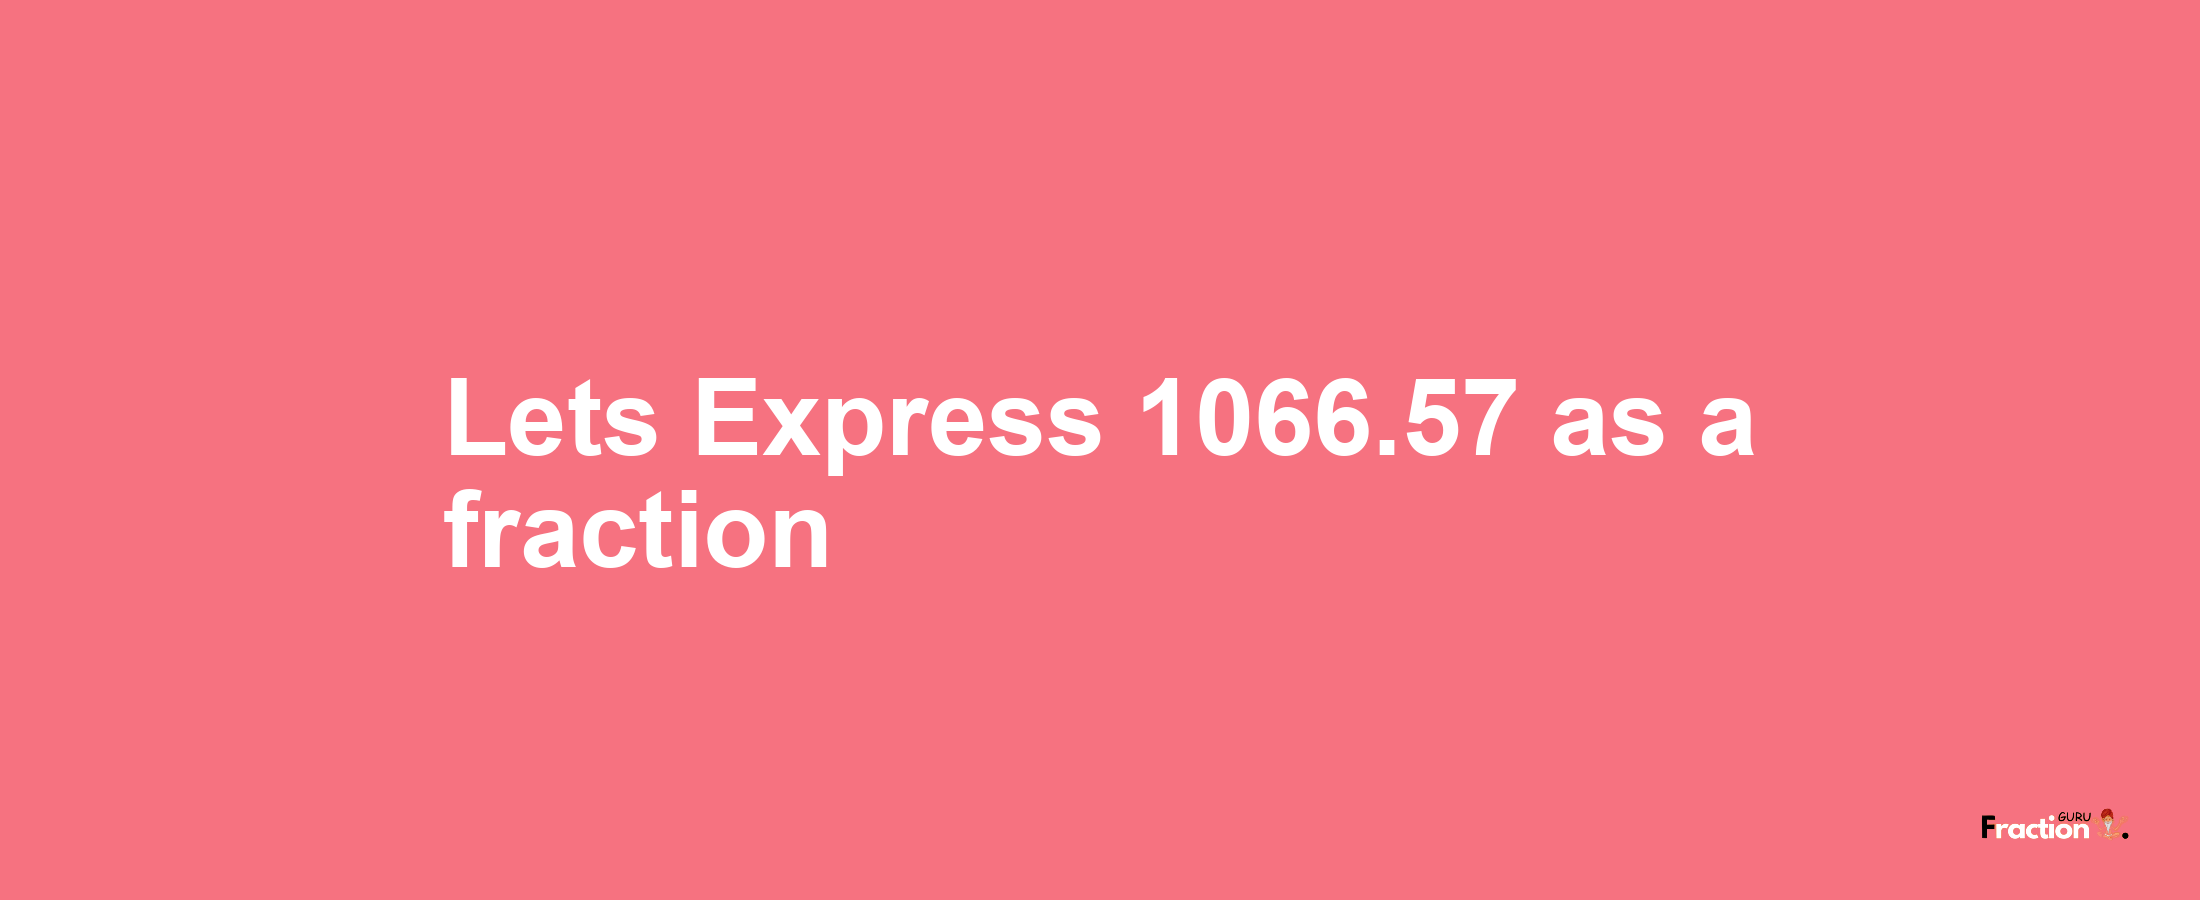 Lets Express 1066.57 as afraction